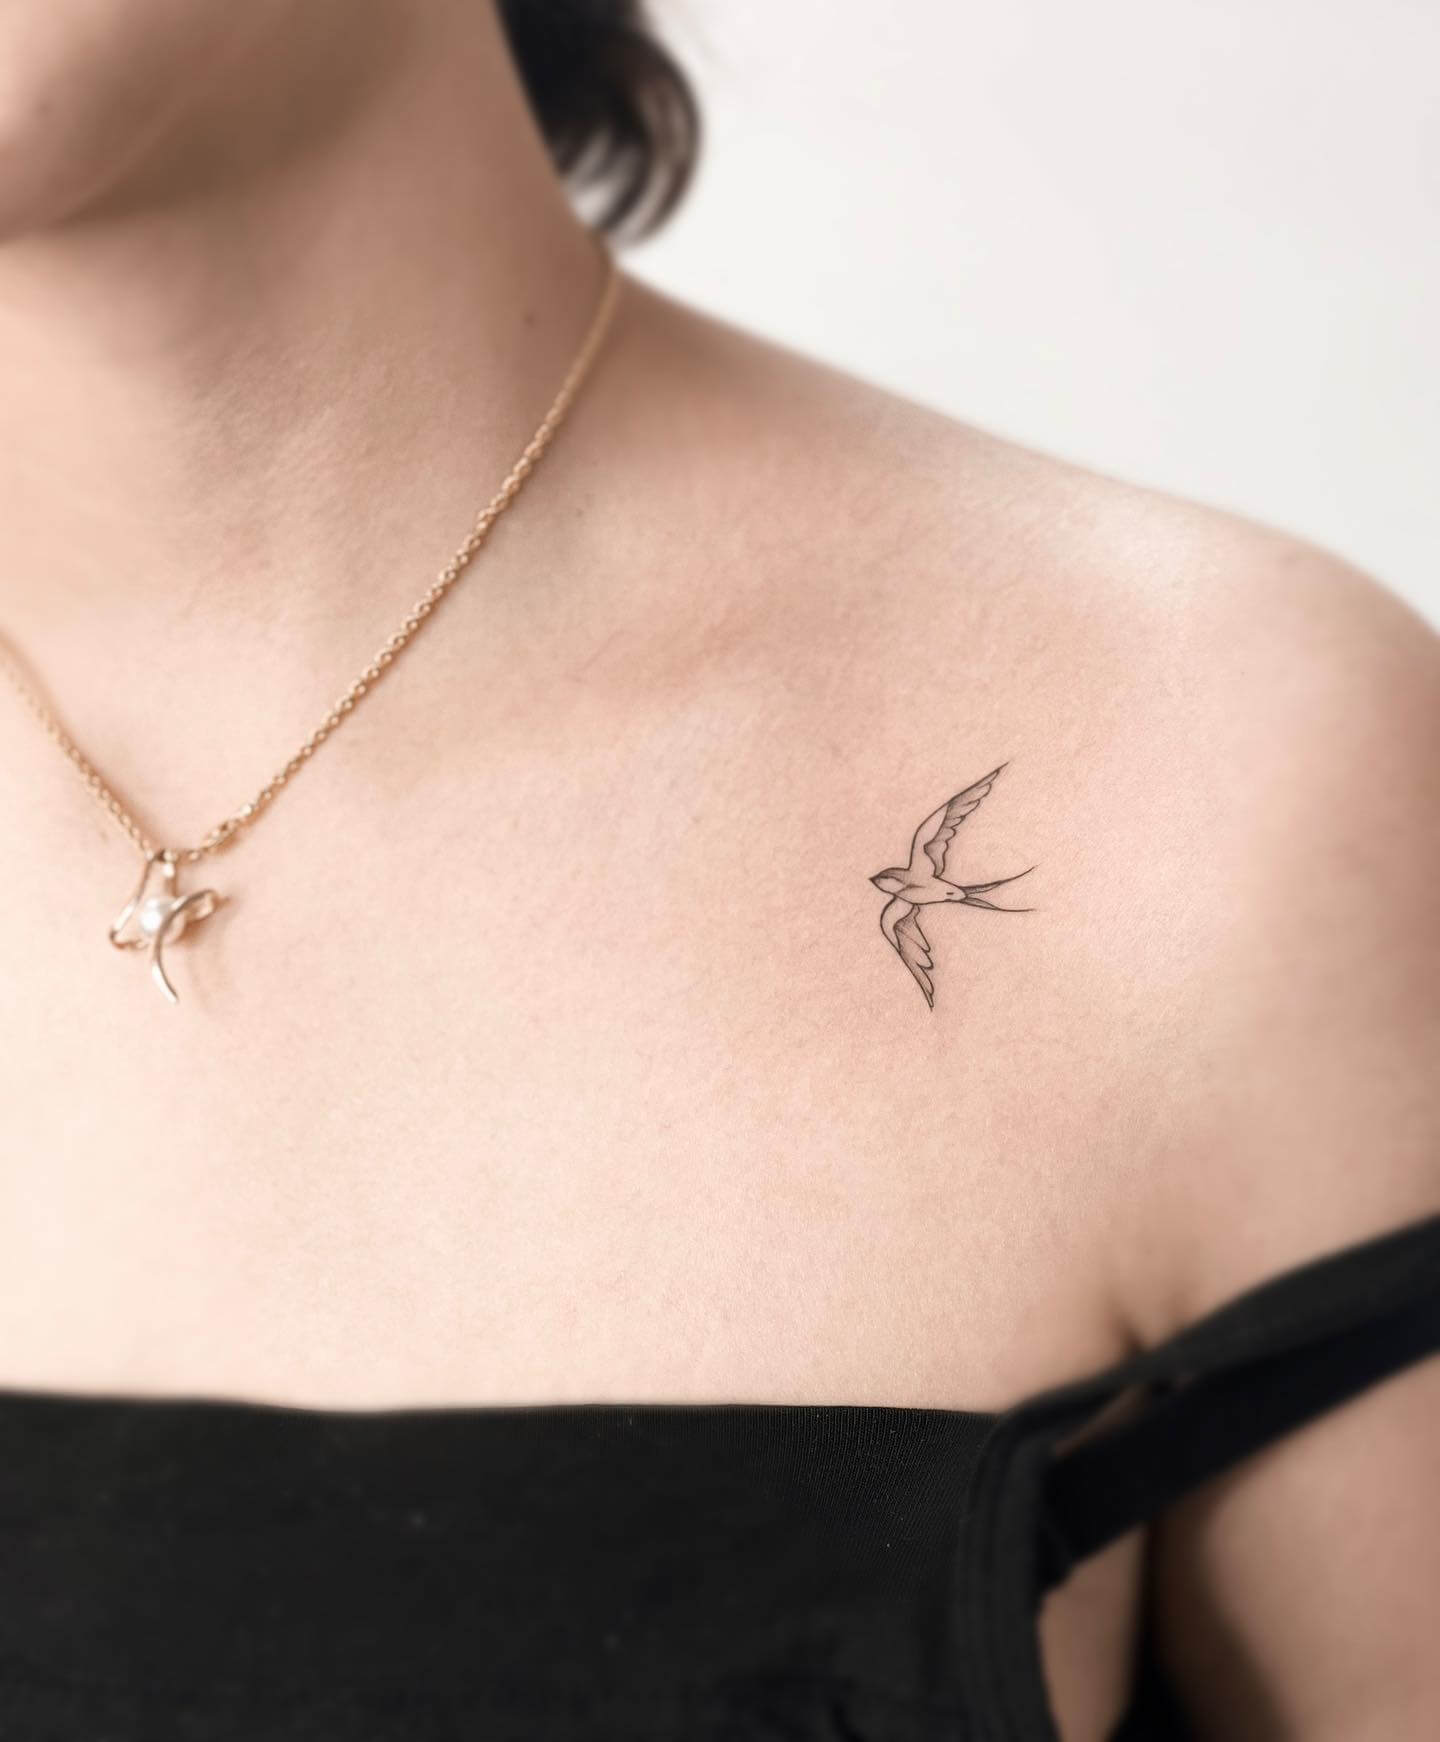 Tiny Tattoos For Collarbone